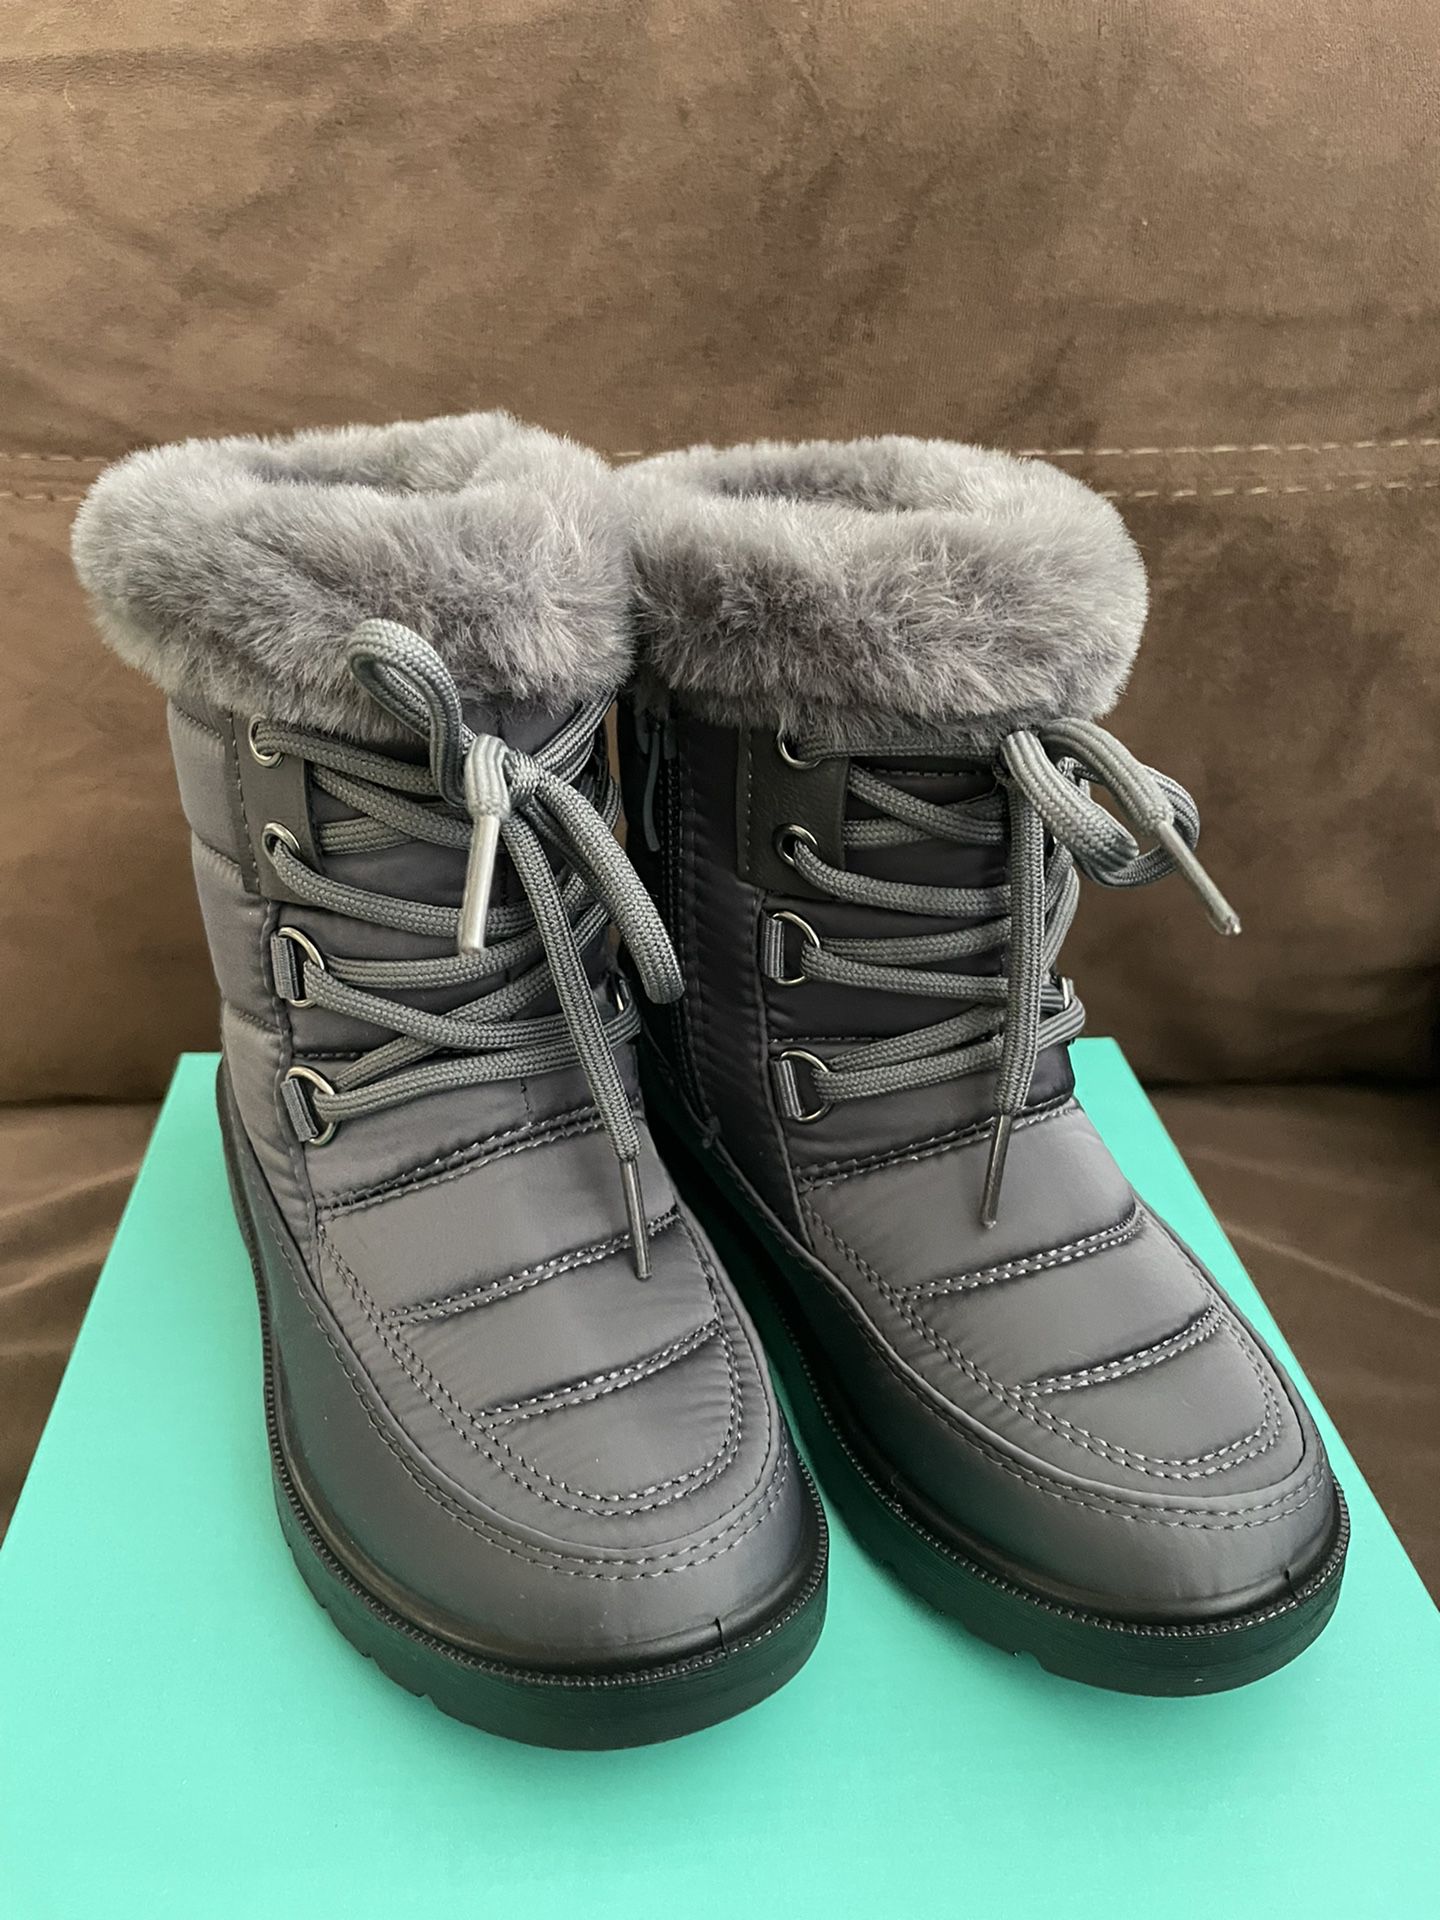 Snow Boots - Size 10 (child)